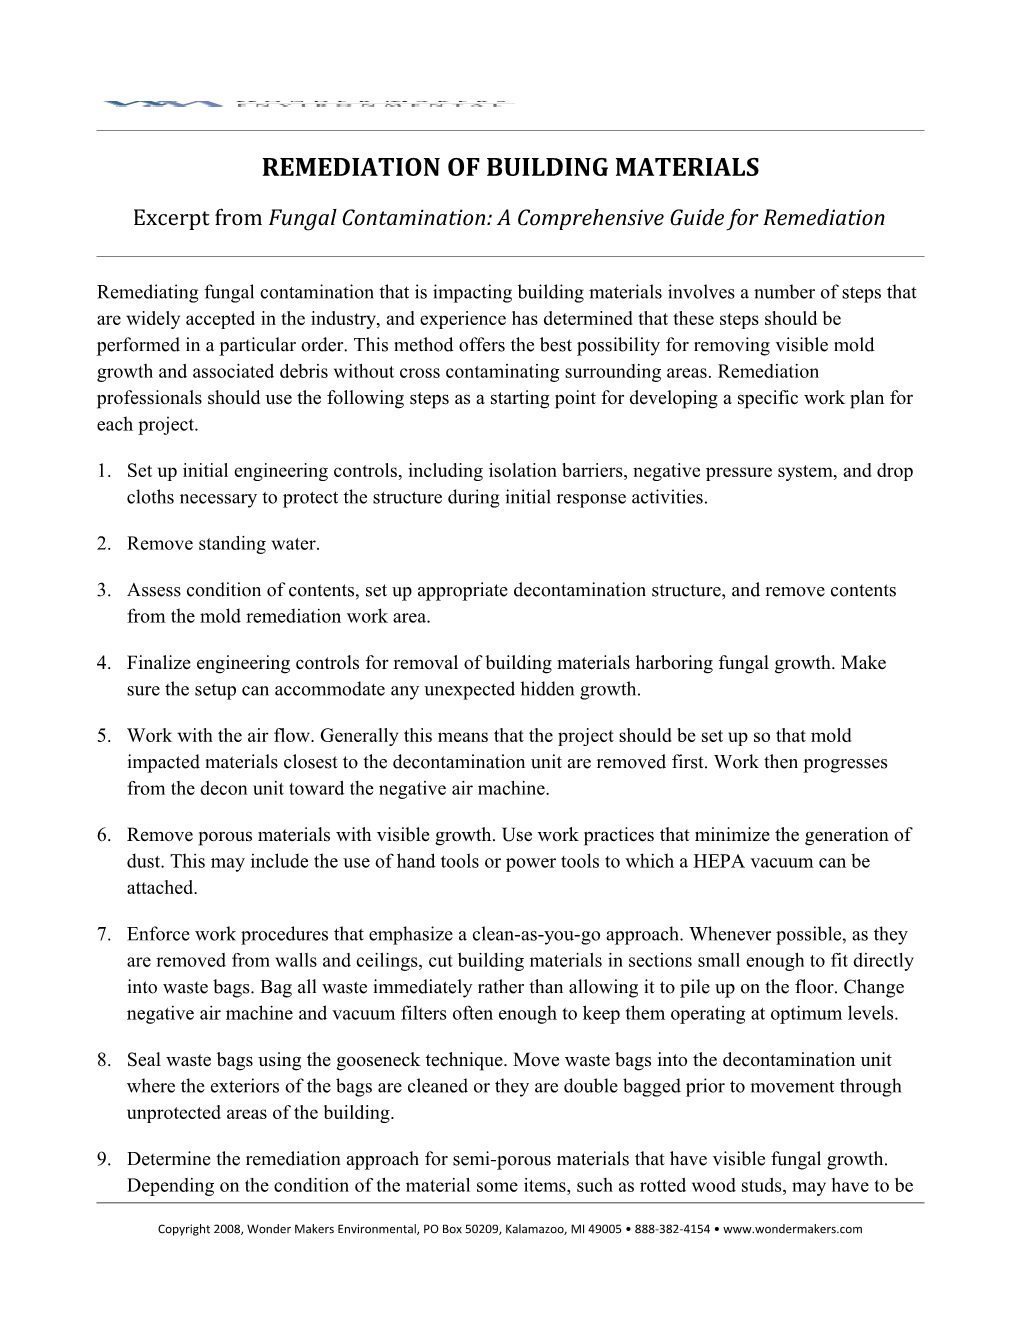 Remediation of Building Materialspage 1 of 3